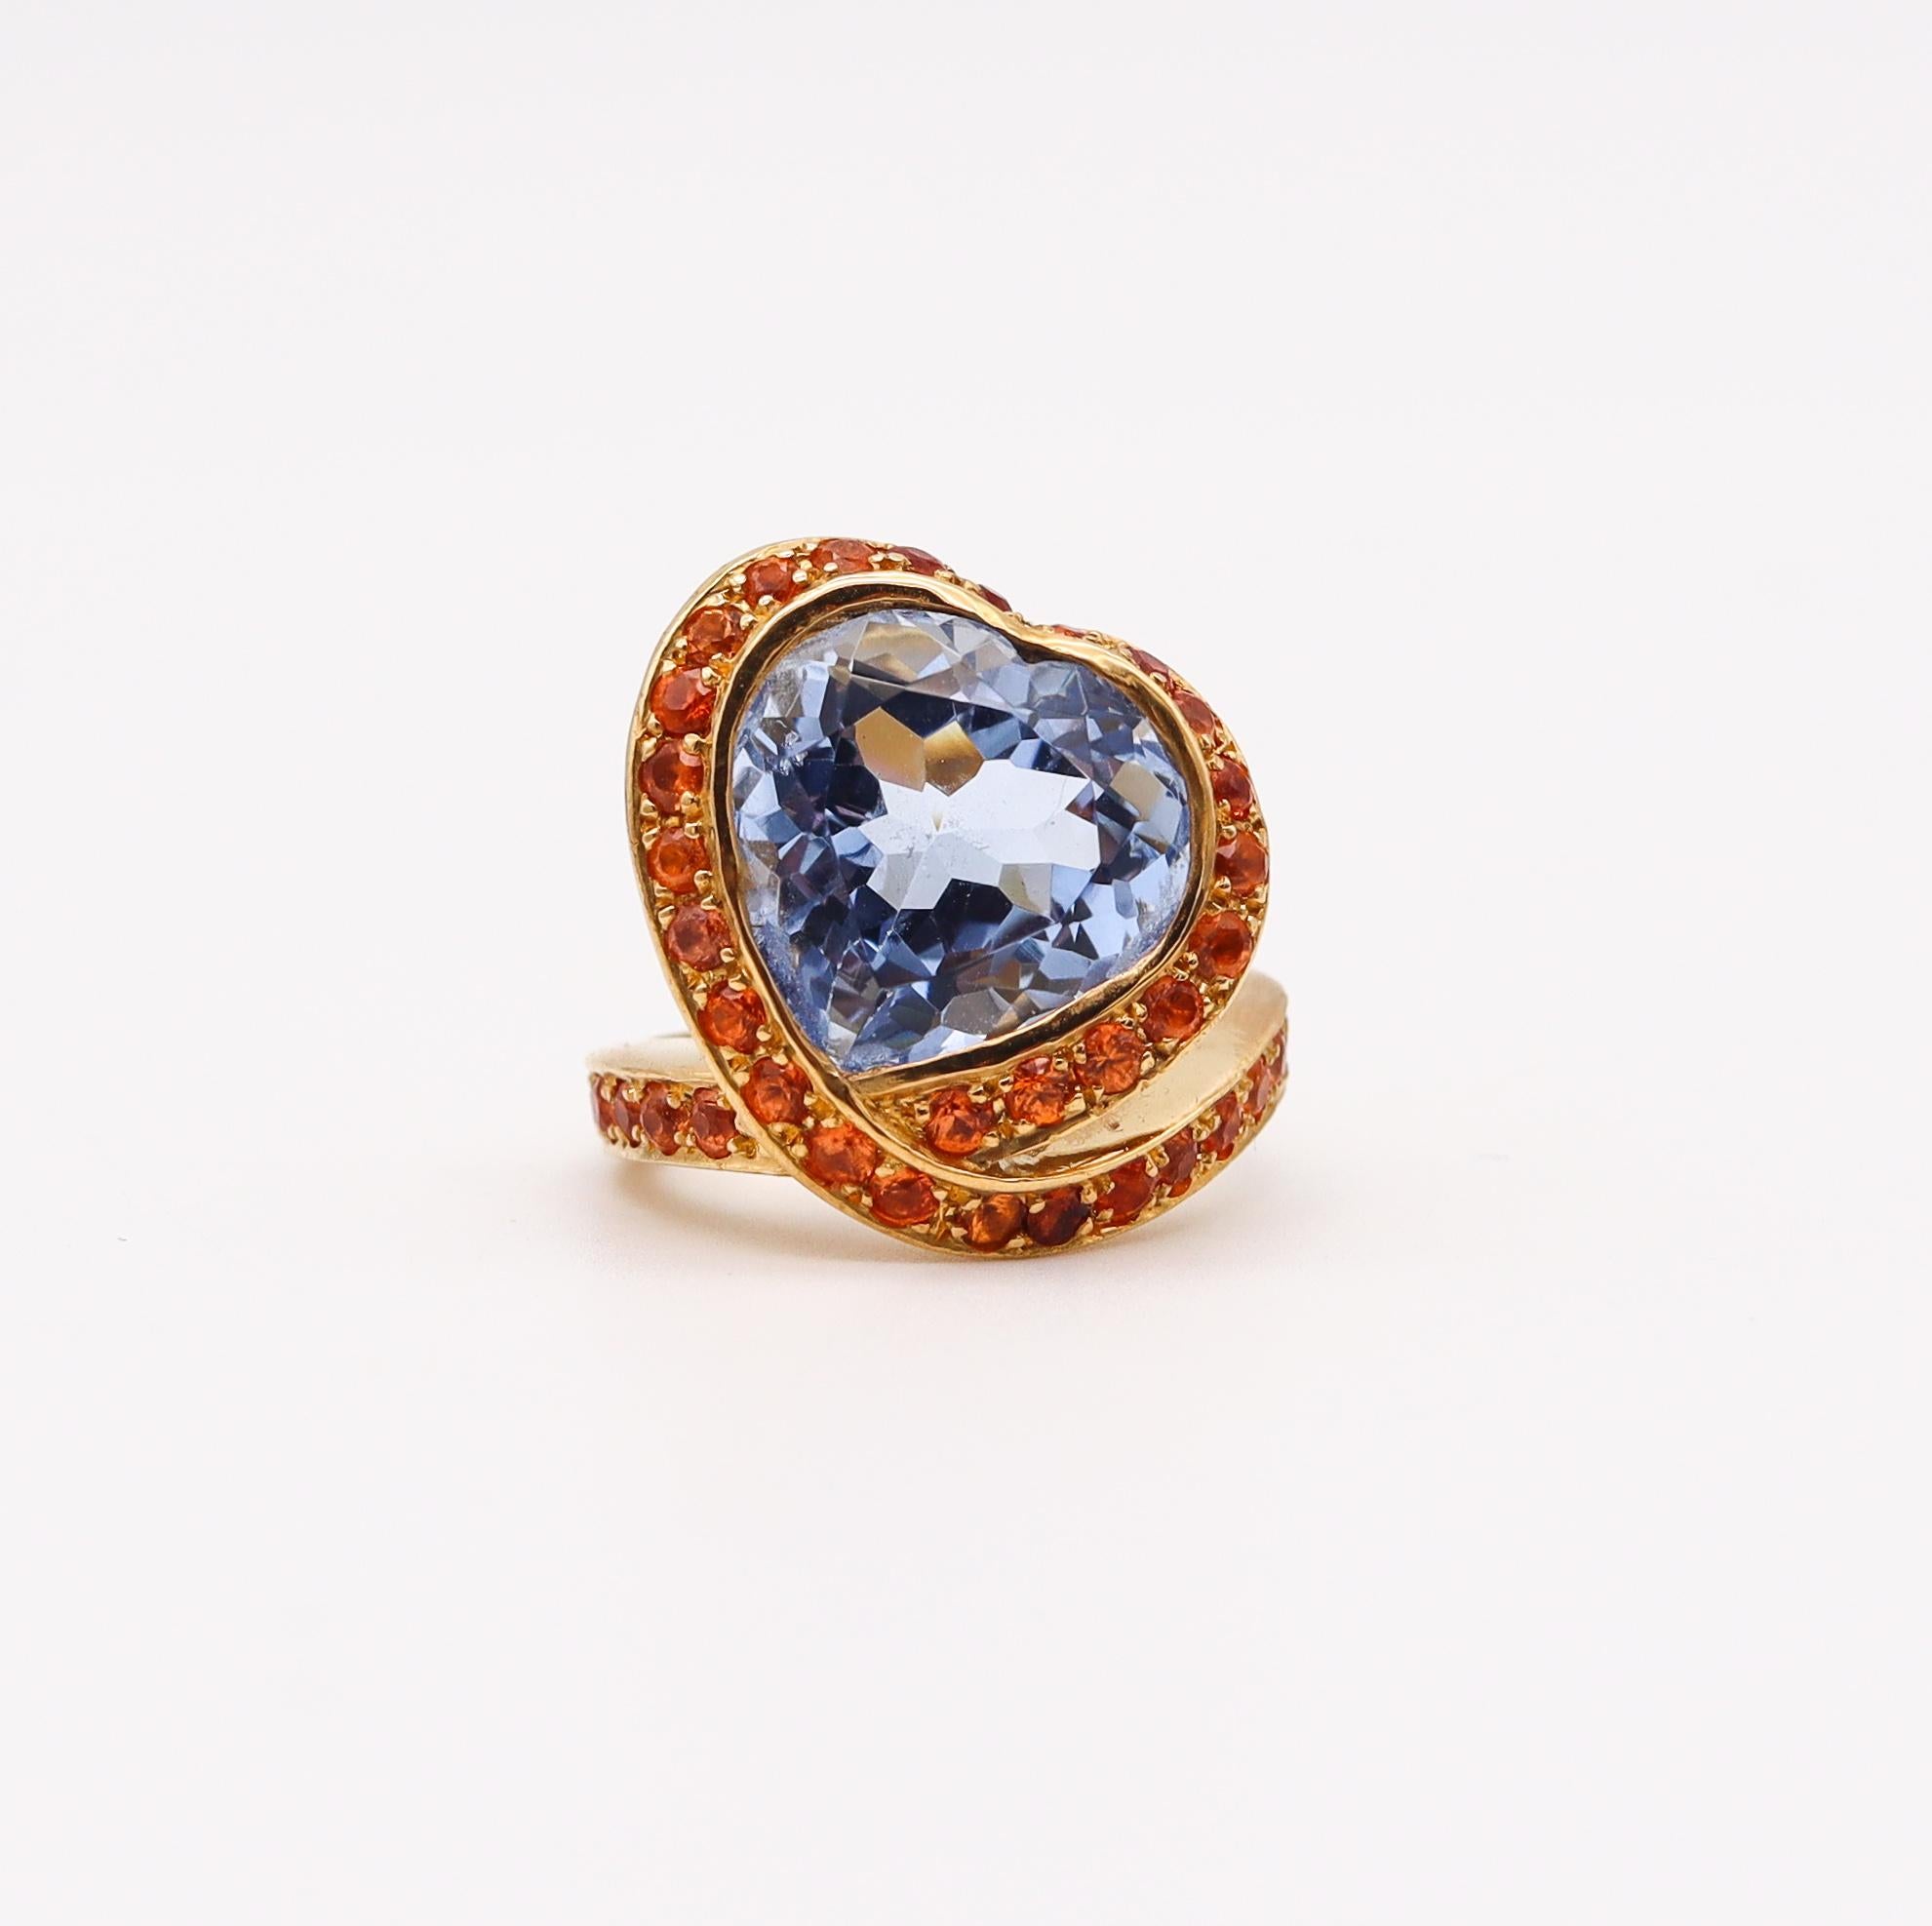 Modernist Nardi Venice Cocktail Ring in 18kt Gold with 10.83 Cts Aquamarine & Spessartite